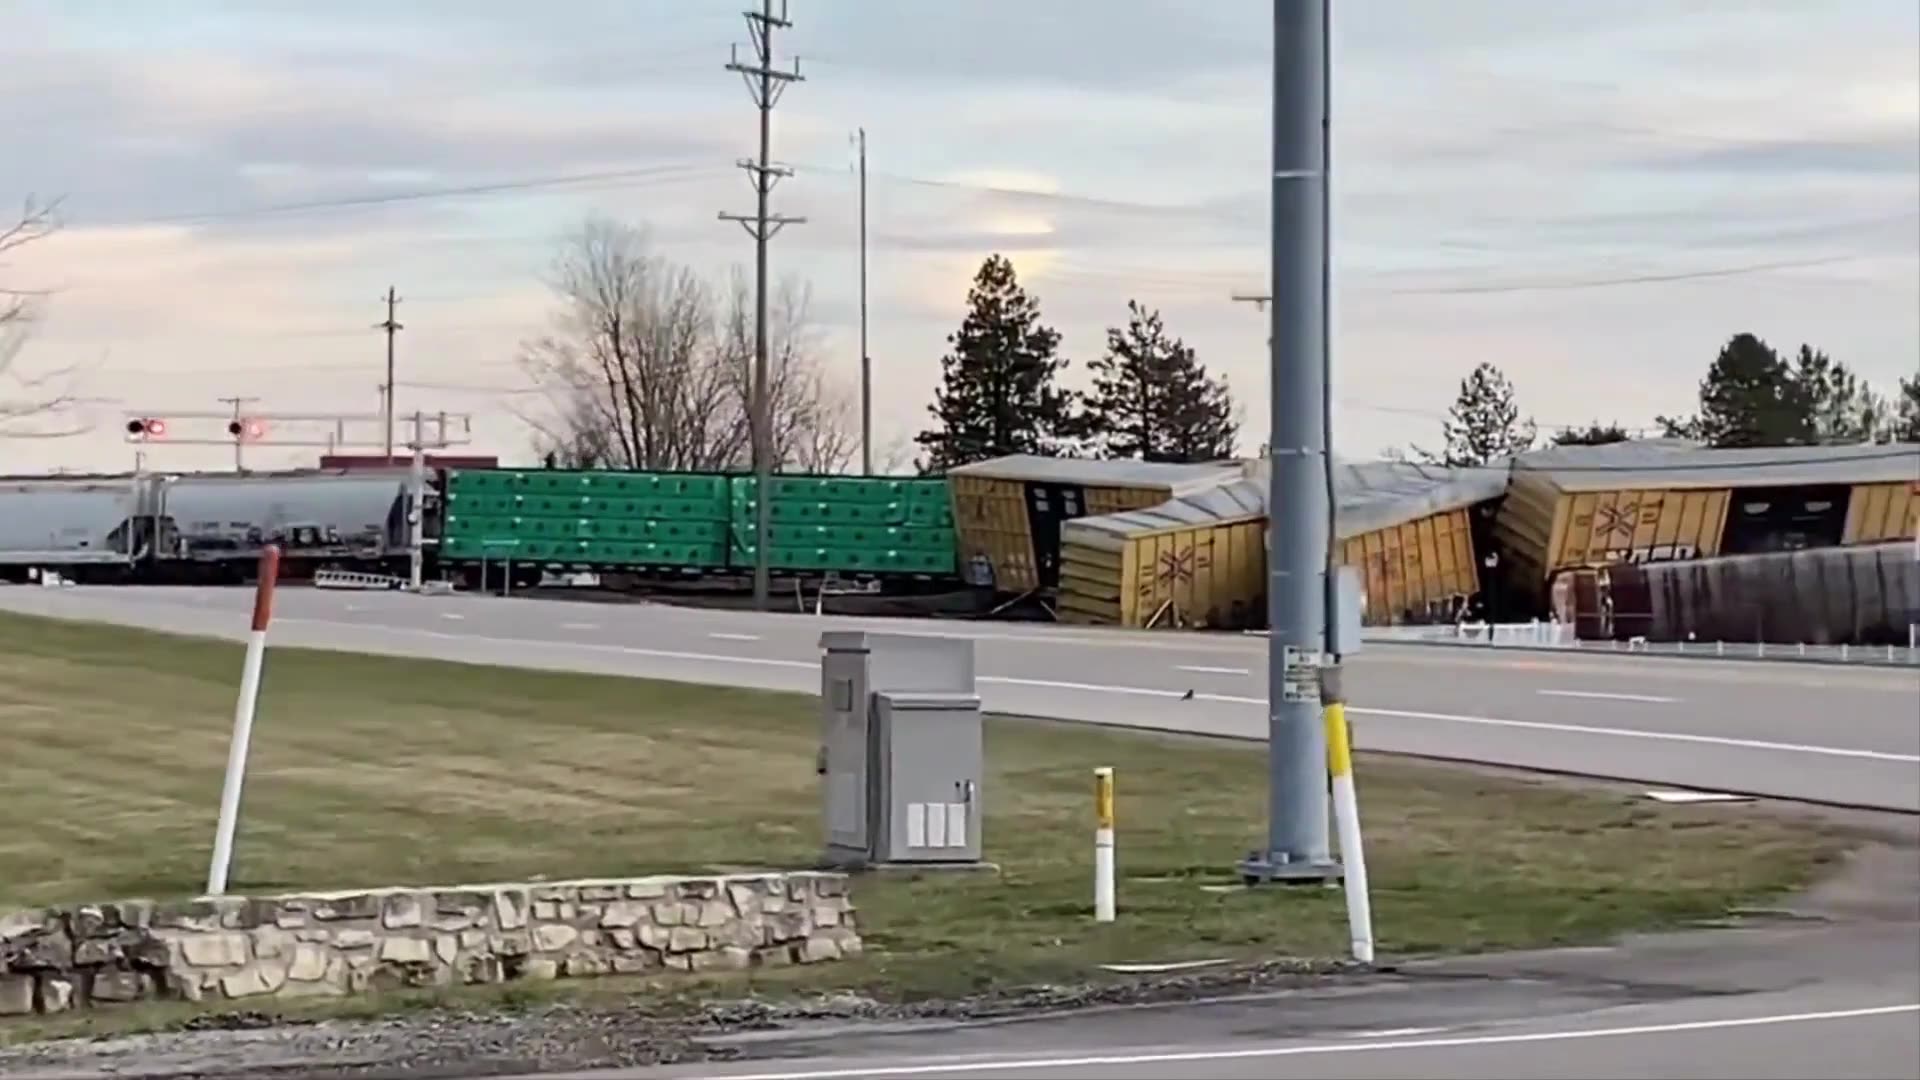 Another train derailment in Ohio, it’s Norfolk Southern again [VIDEO]